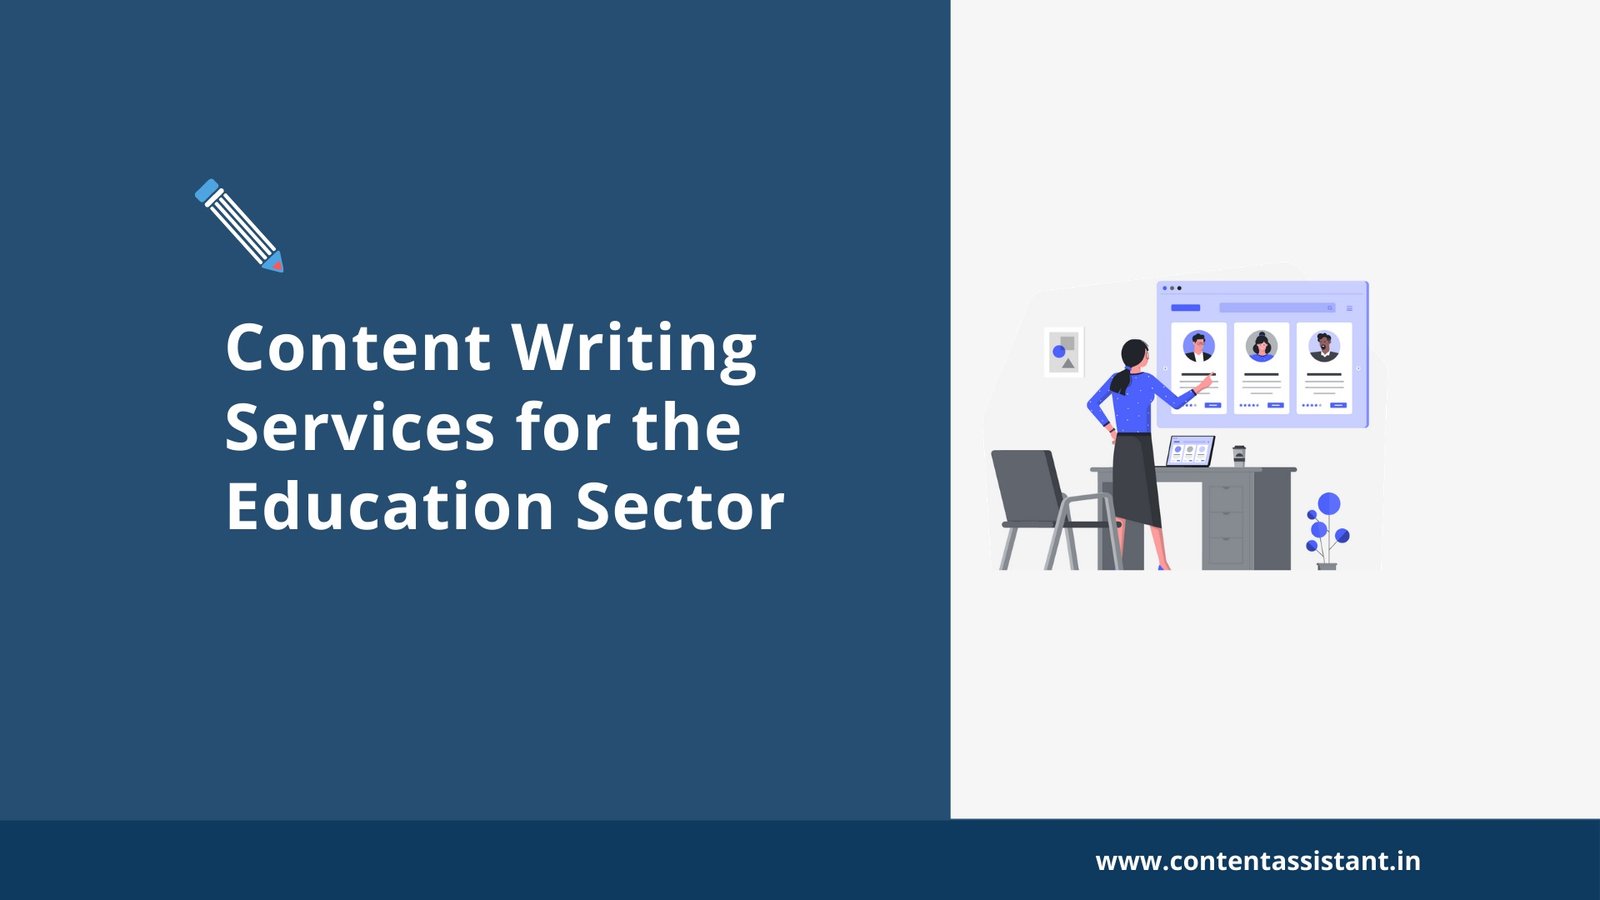 Content Writing Services for the Education Sector